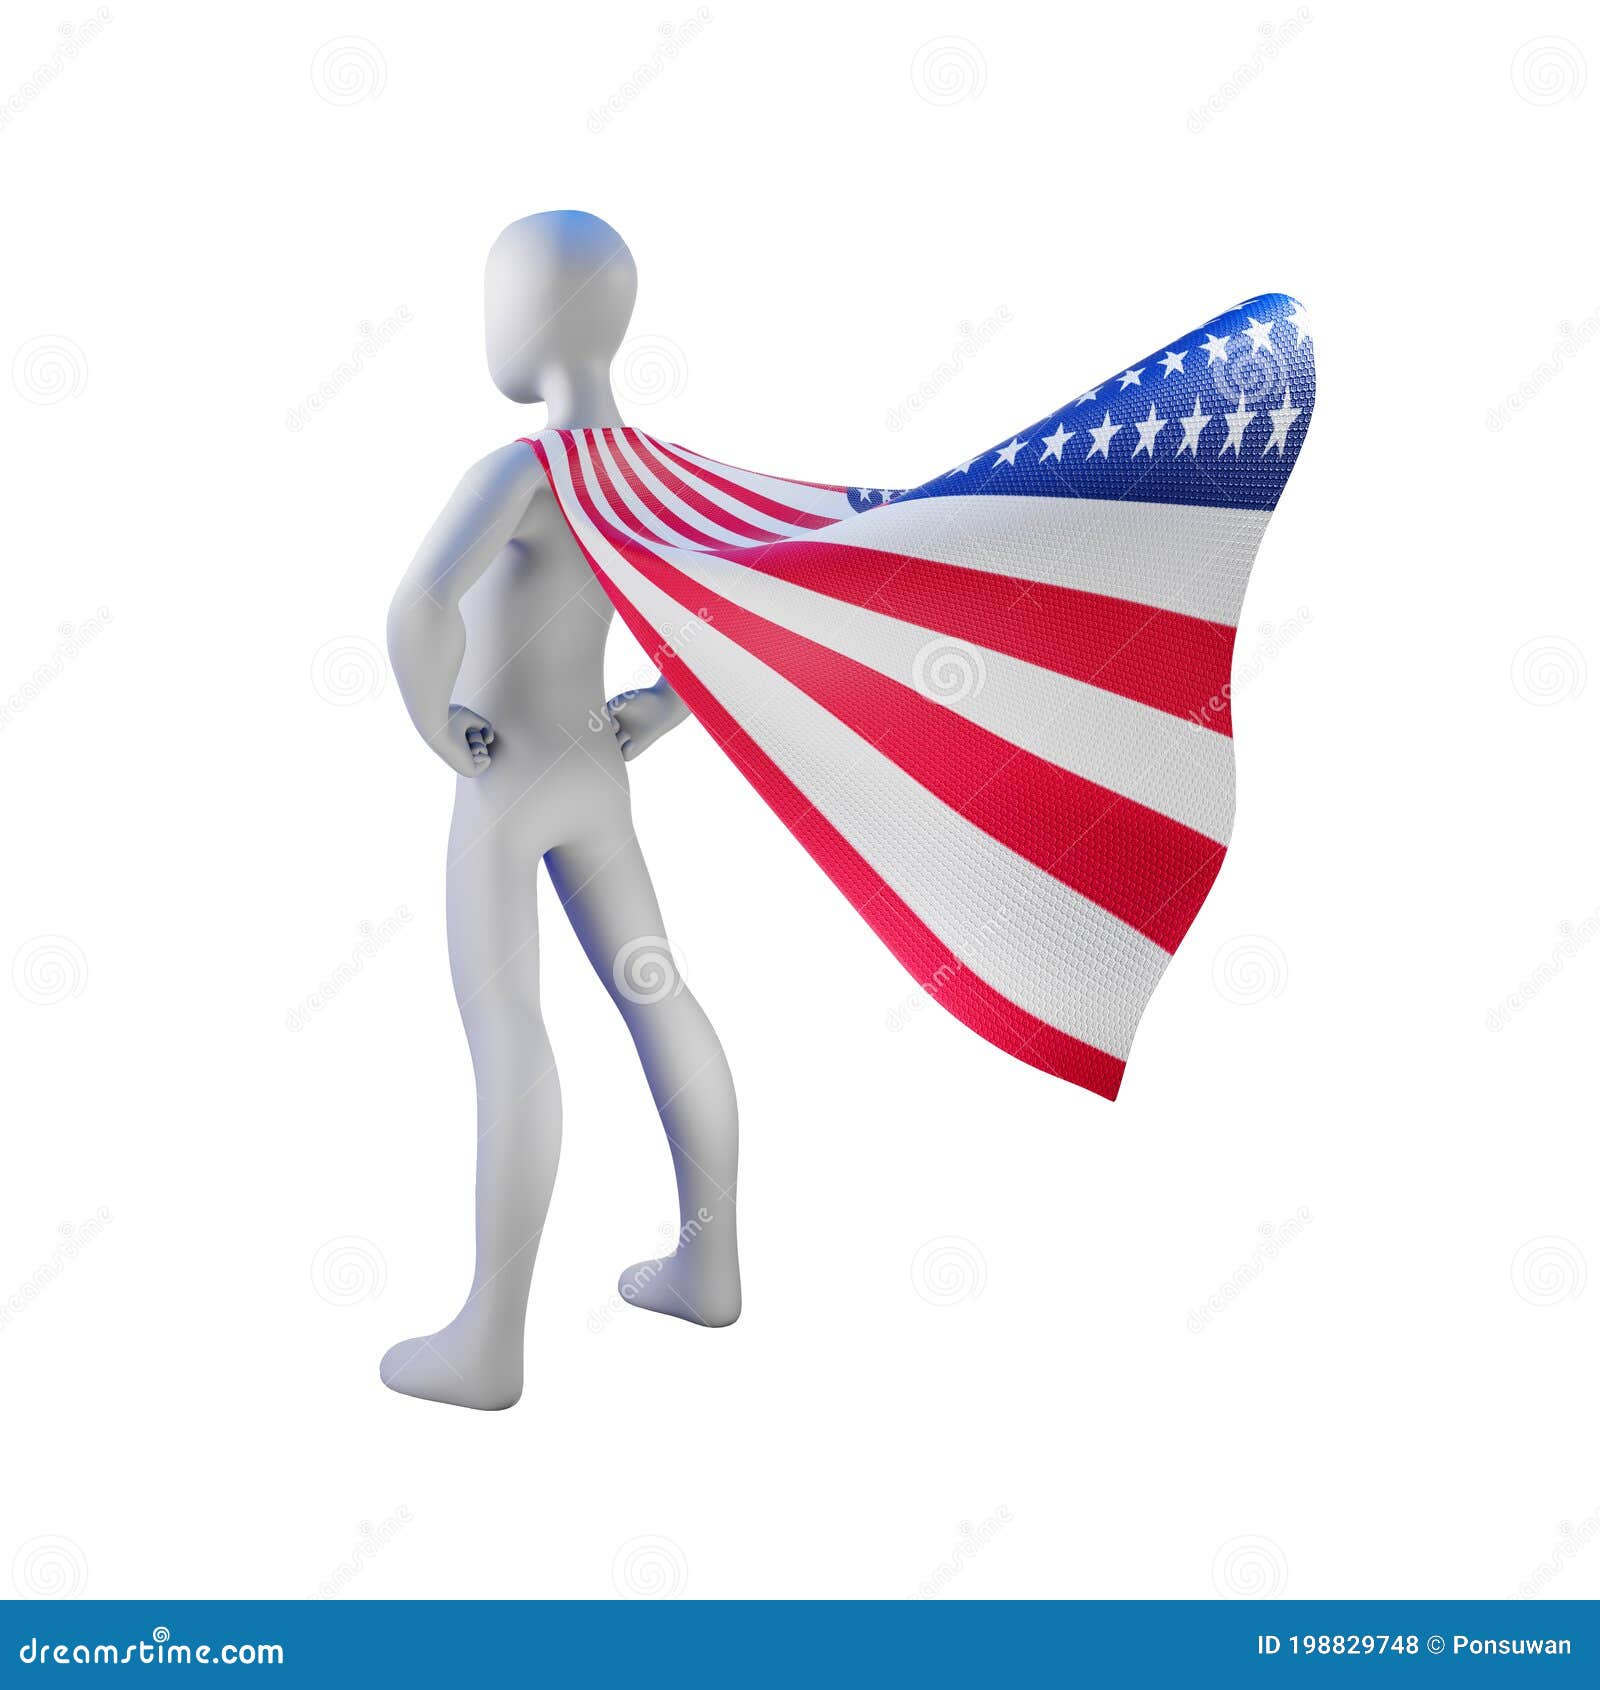 superhero 3d render with united states nation cape